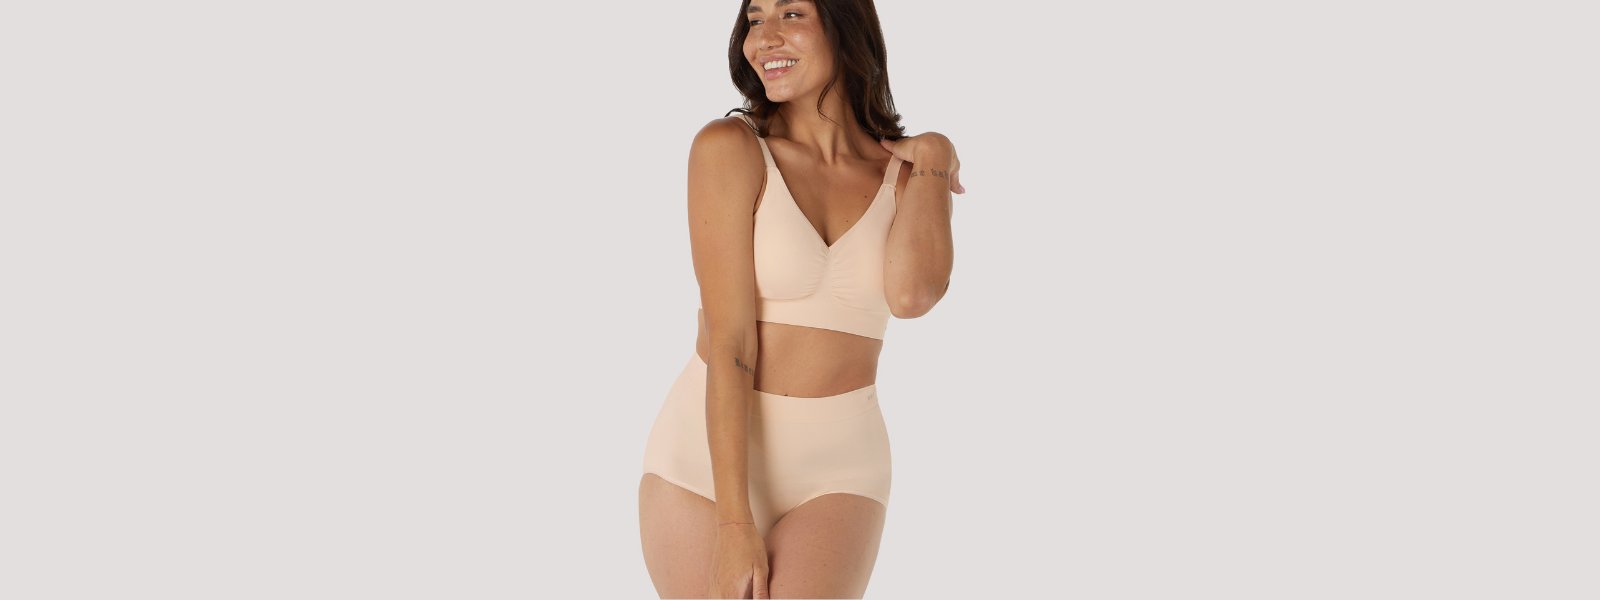 Best Selling wirefree bras, comfortable knickers and shapewear | Bella Bodies Australia